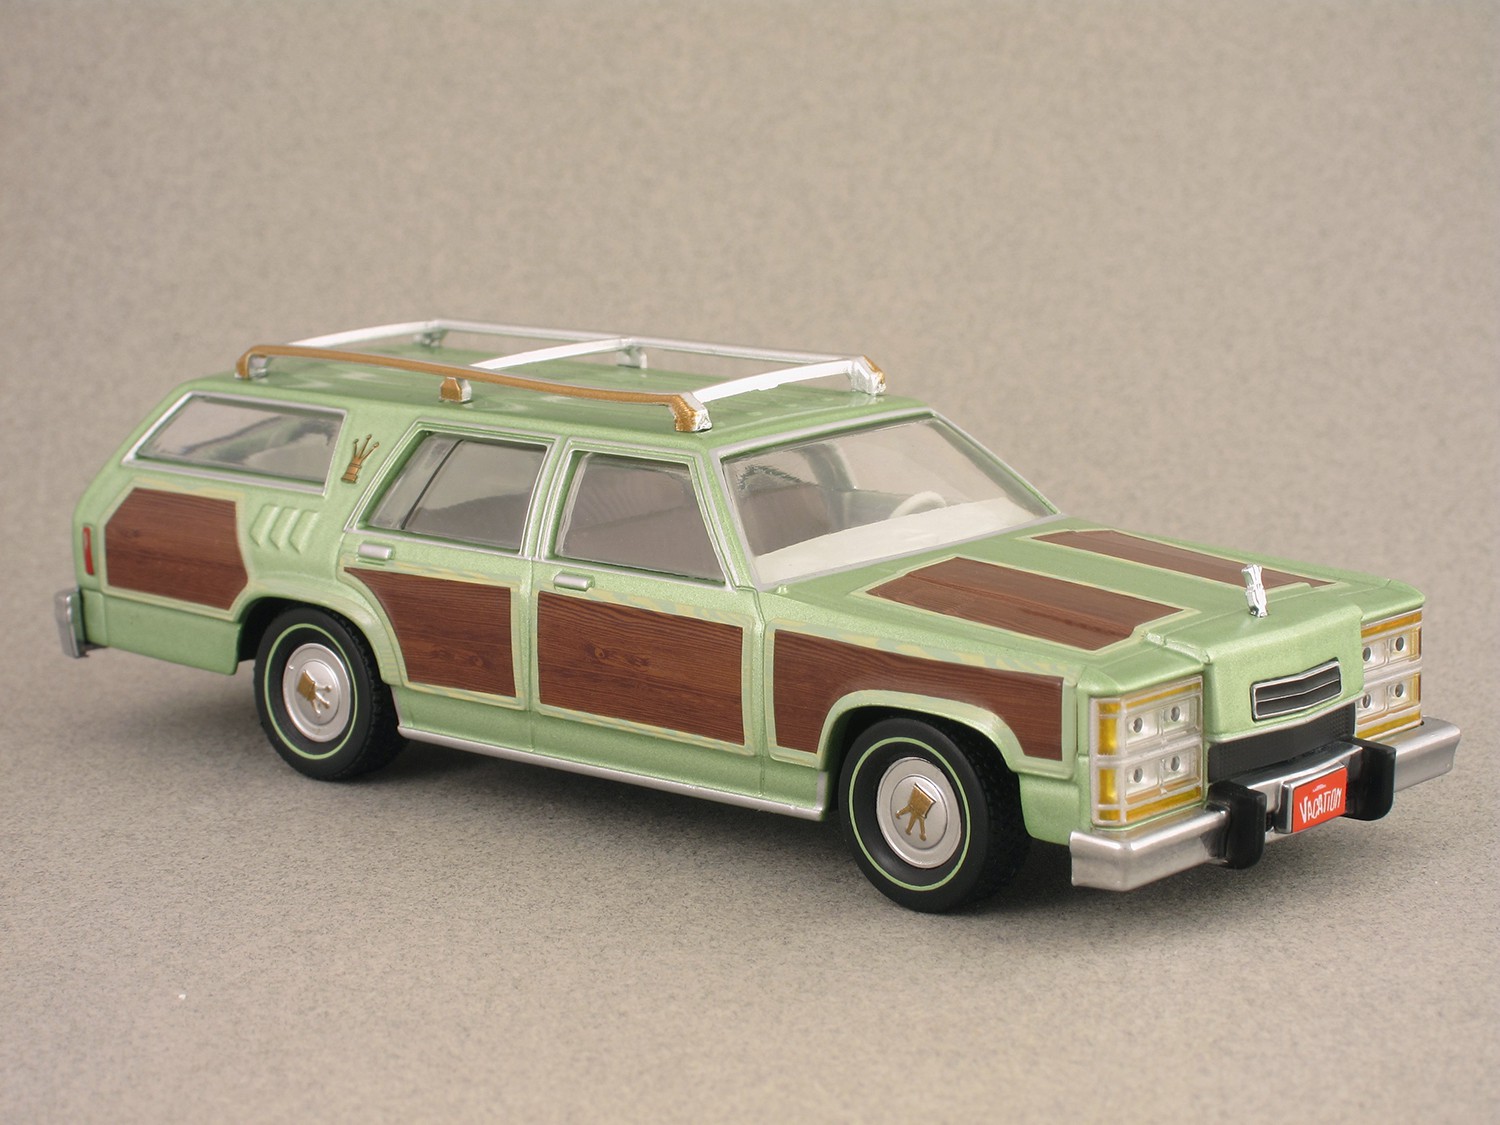 Truckster Wagon Queen Family "National Lampoon's Family" (Greenlight) 1/43e